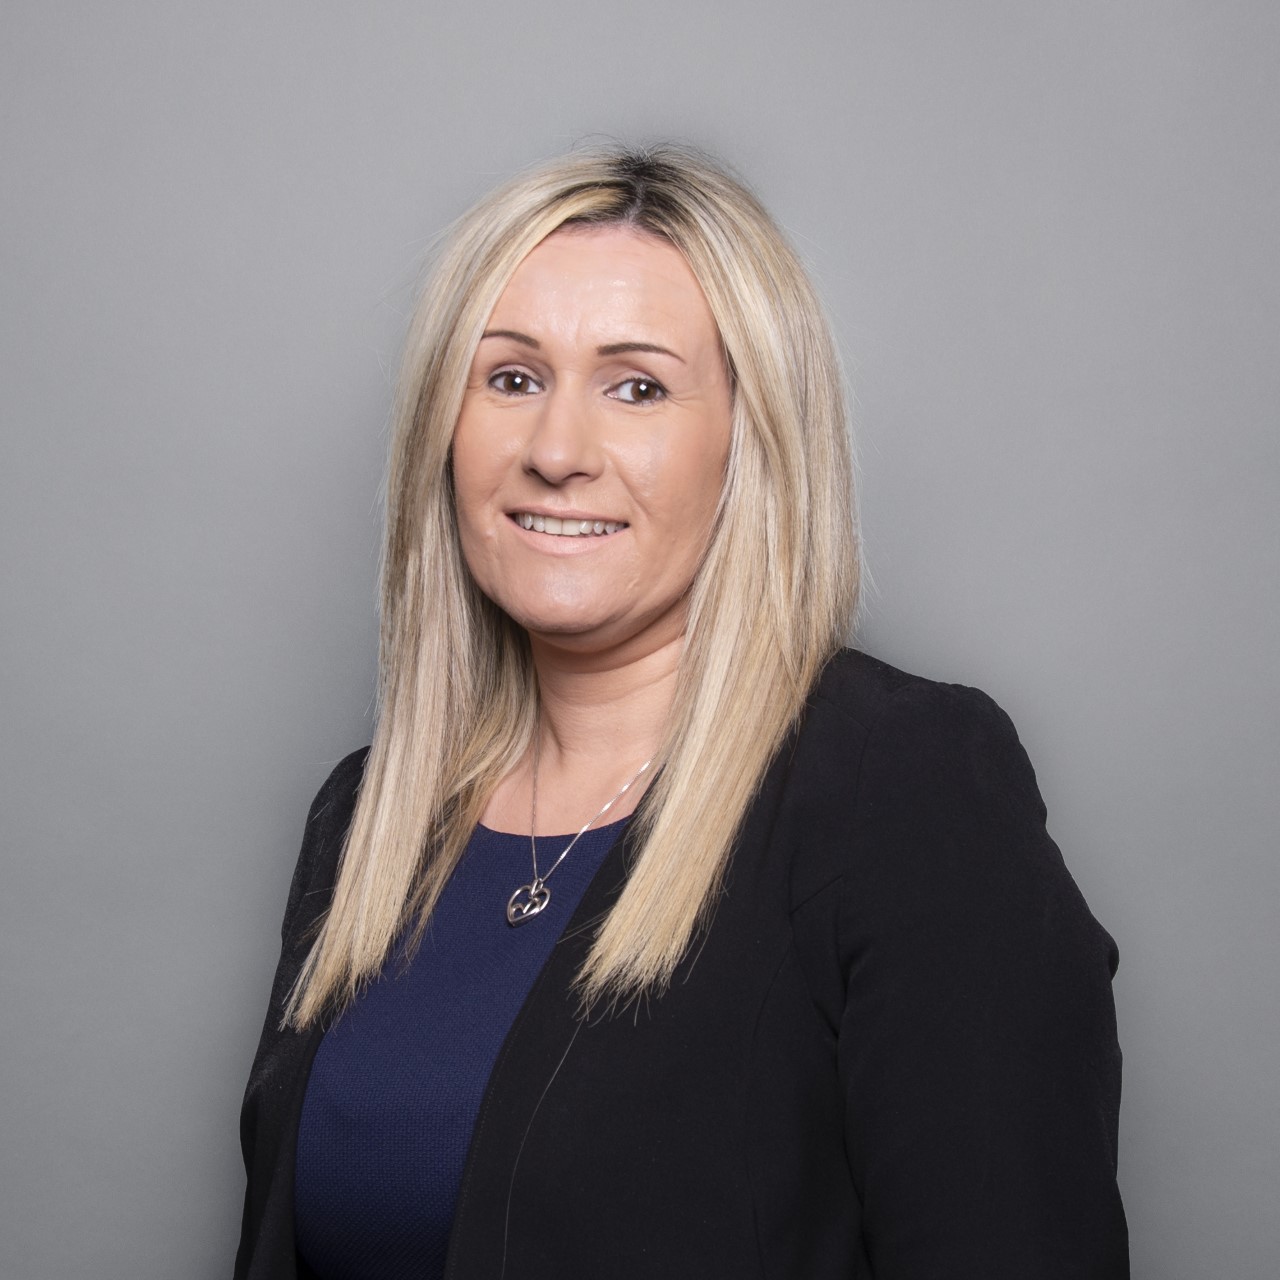 Trio of appointments made at Cushman & Wakefield